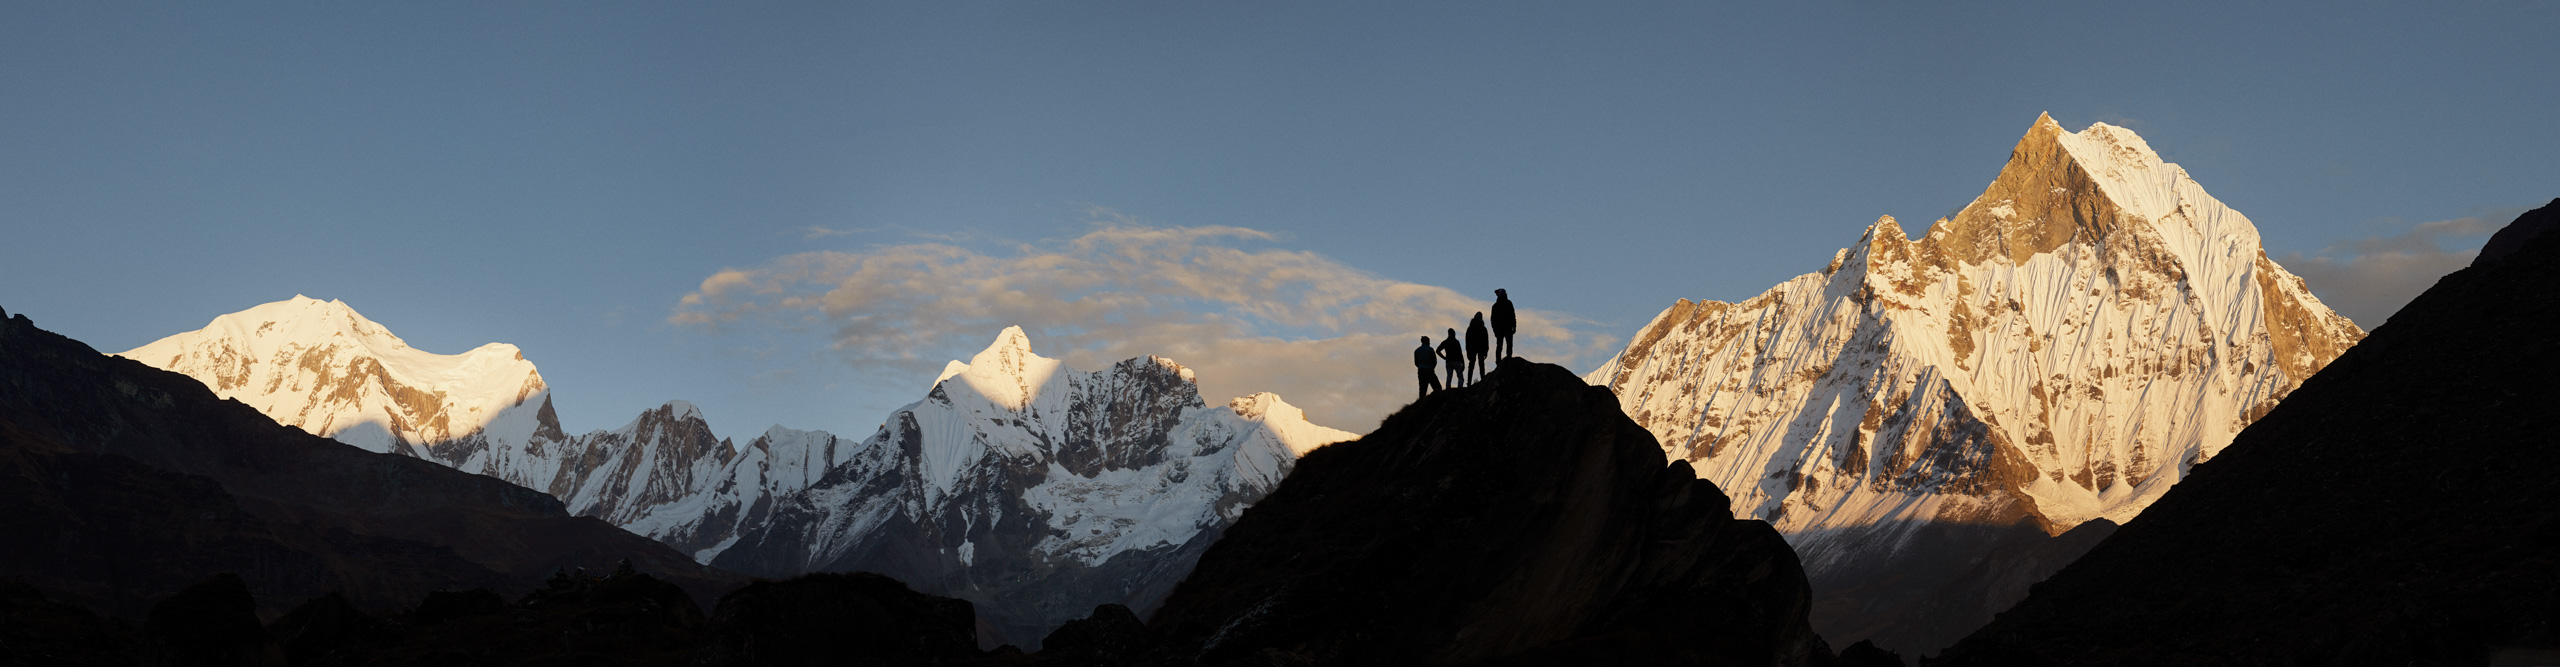 Silhouettes of four climbers in front of Everest at sunset on a clear day, Nepal 